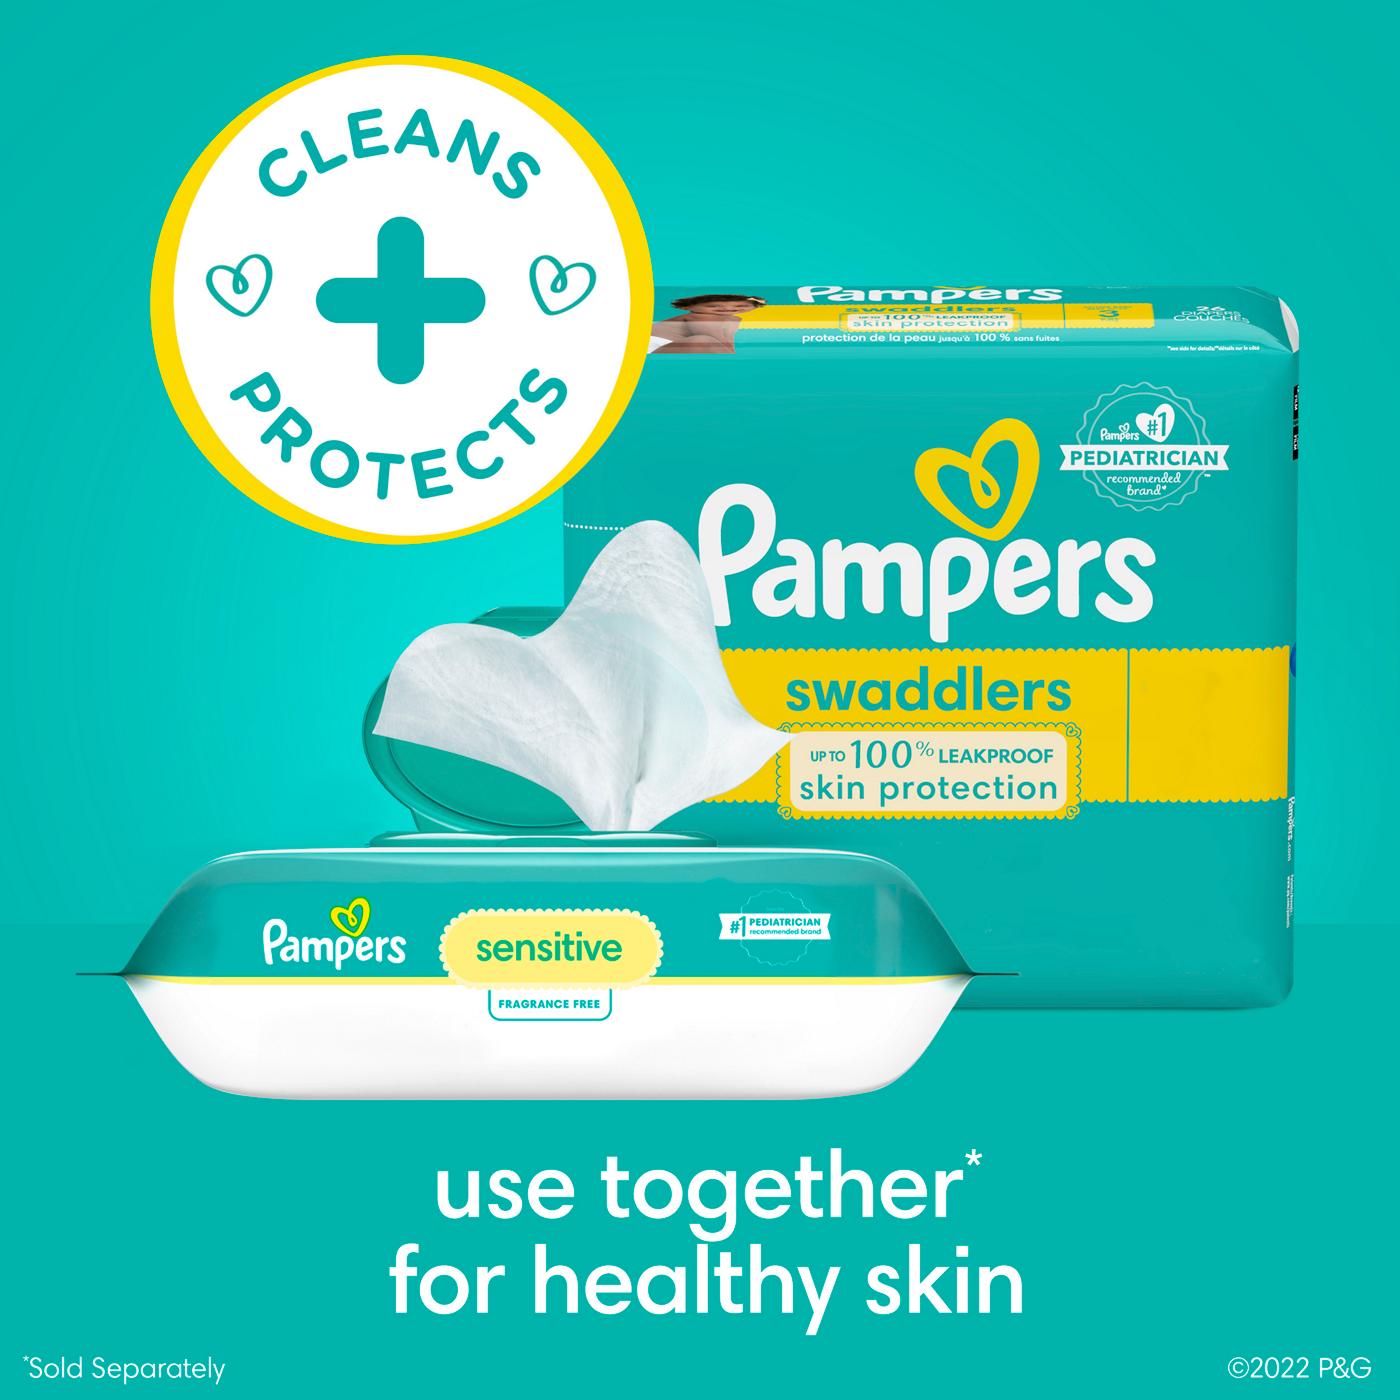 Pampers Sensitive Wipes 12 pk - Fragrance Free; image 7 of 10